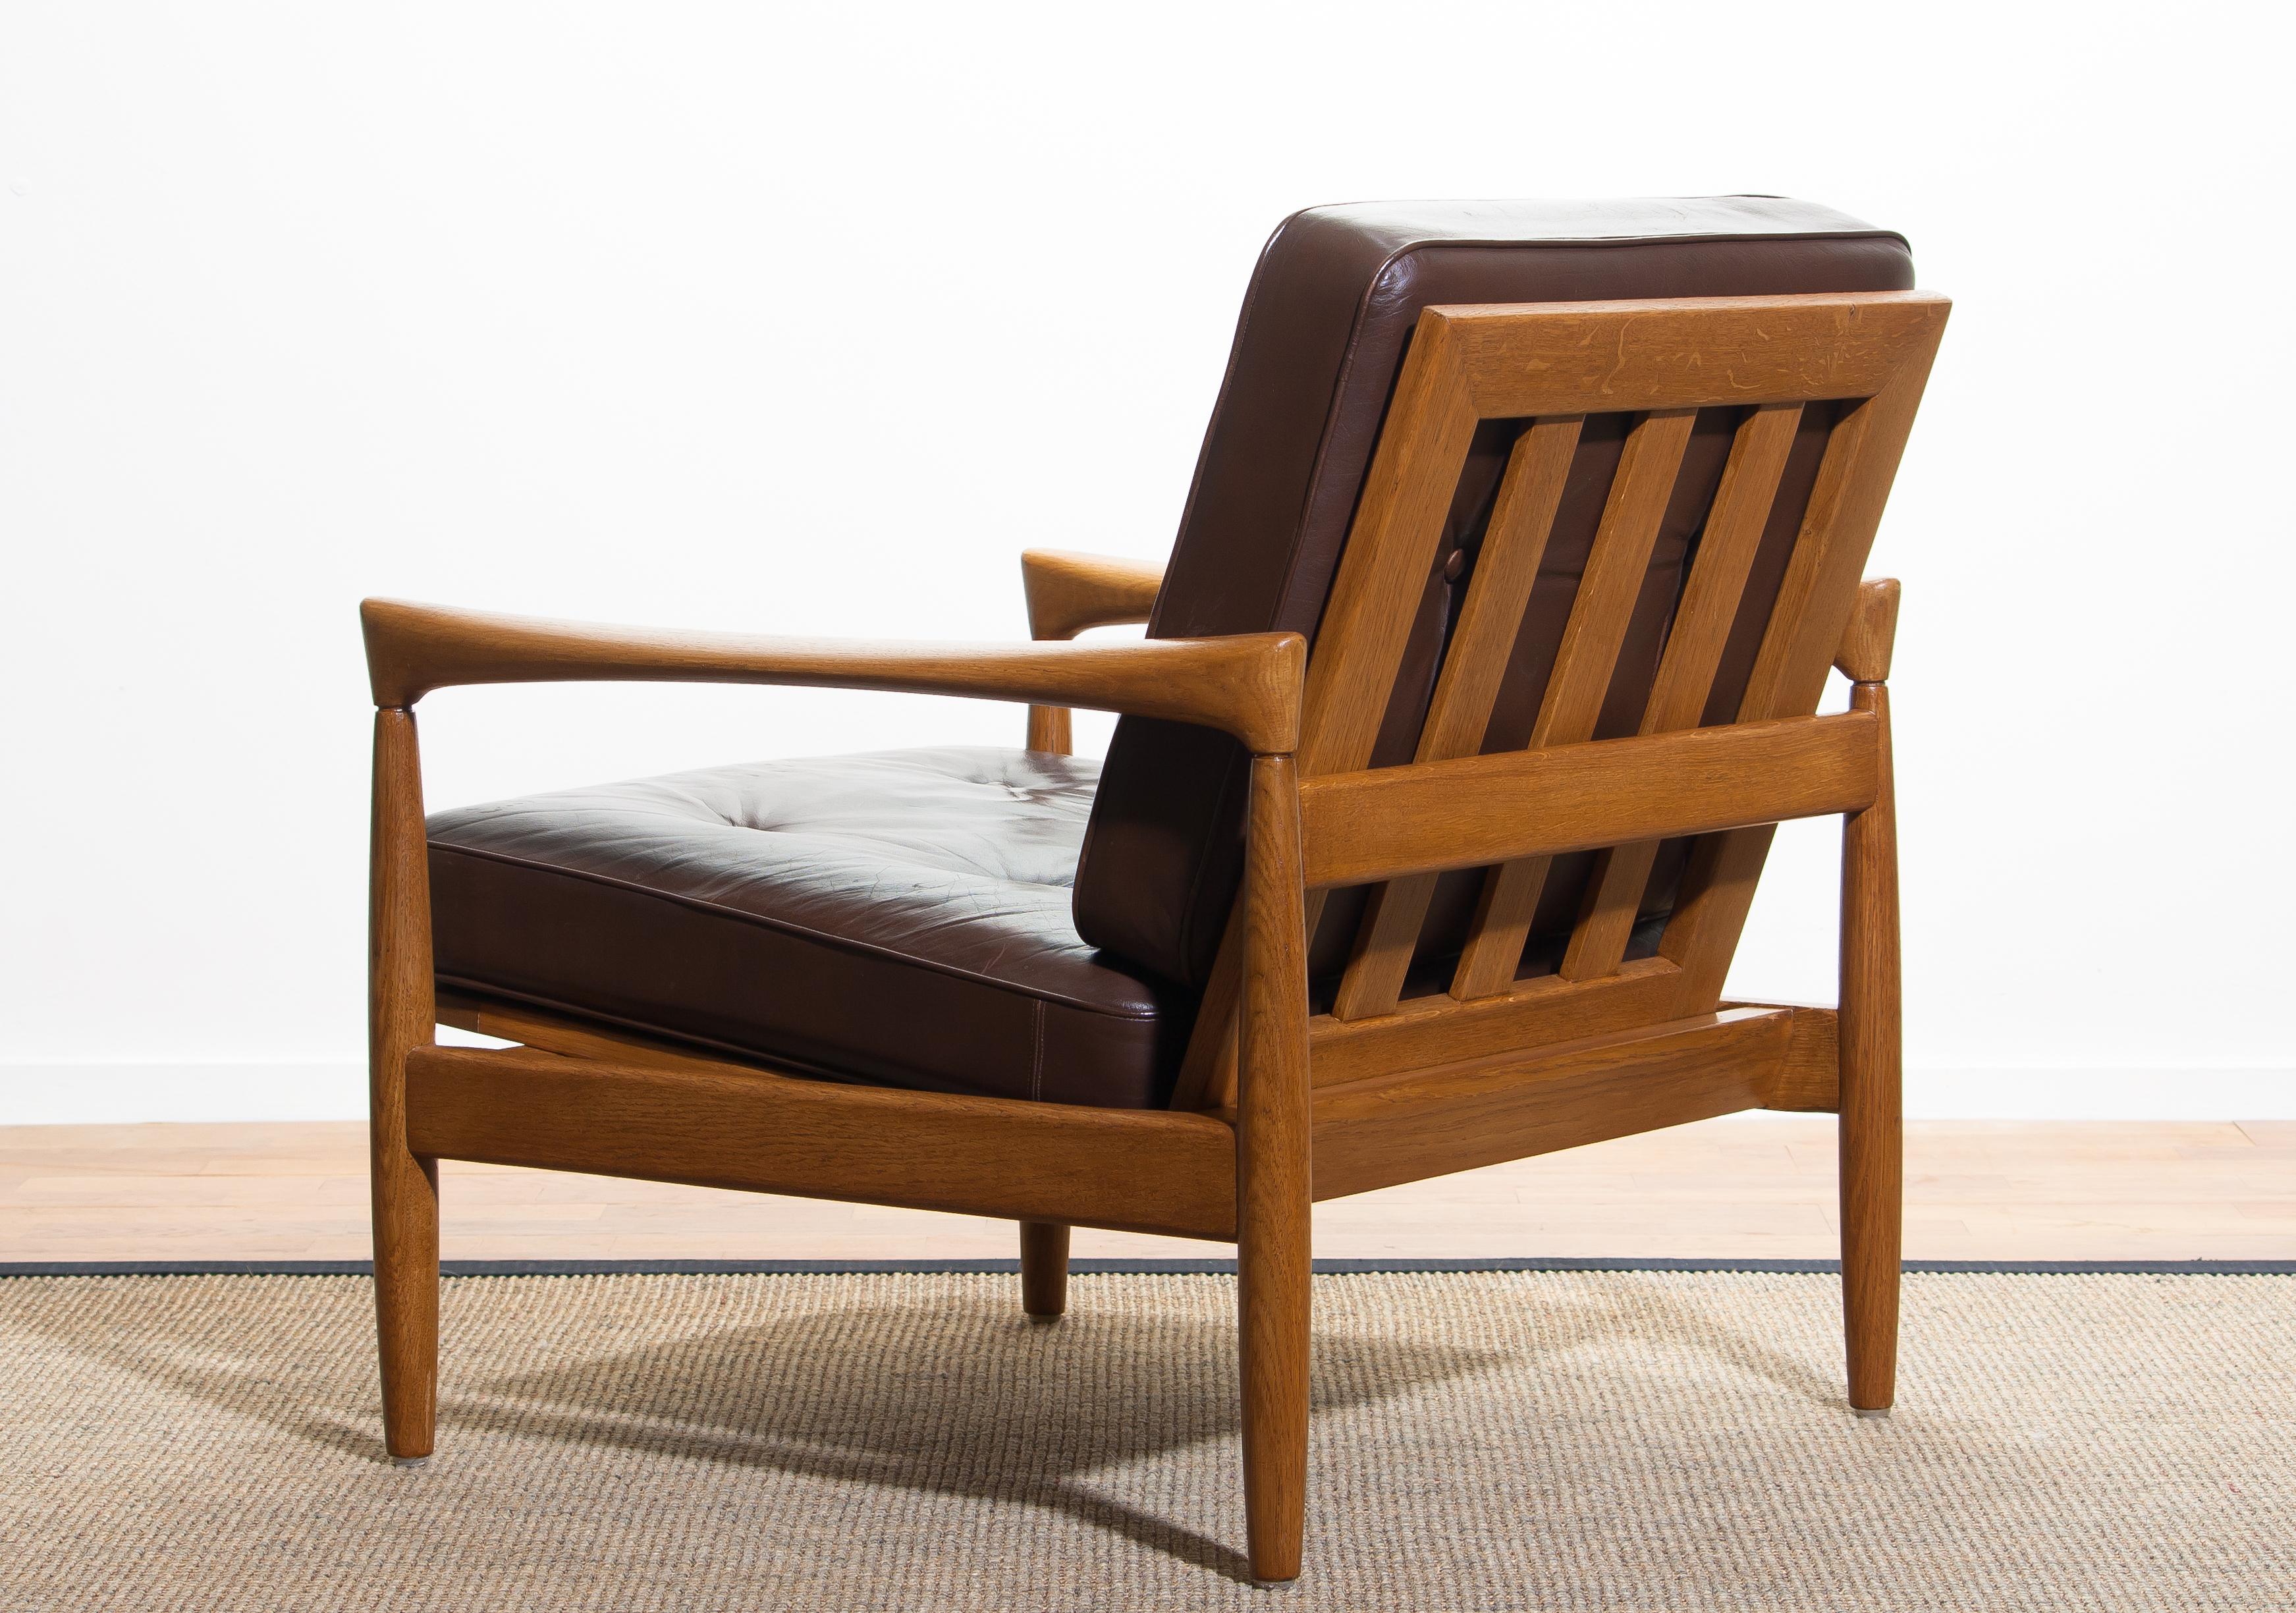 1960s, Oak and Brown Leather Lounge Chair by Erik Wörtz for Bröderna Anderssons 3